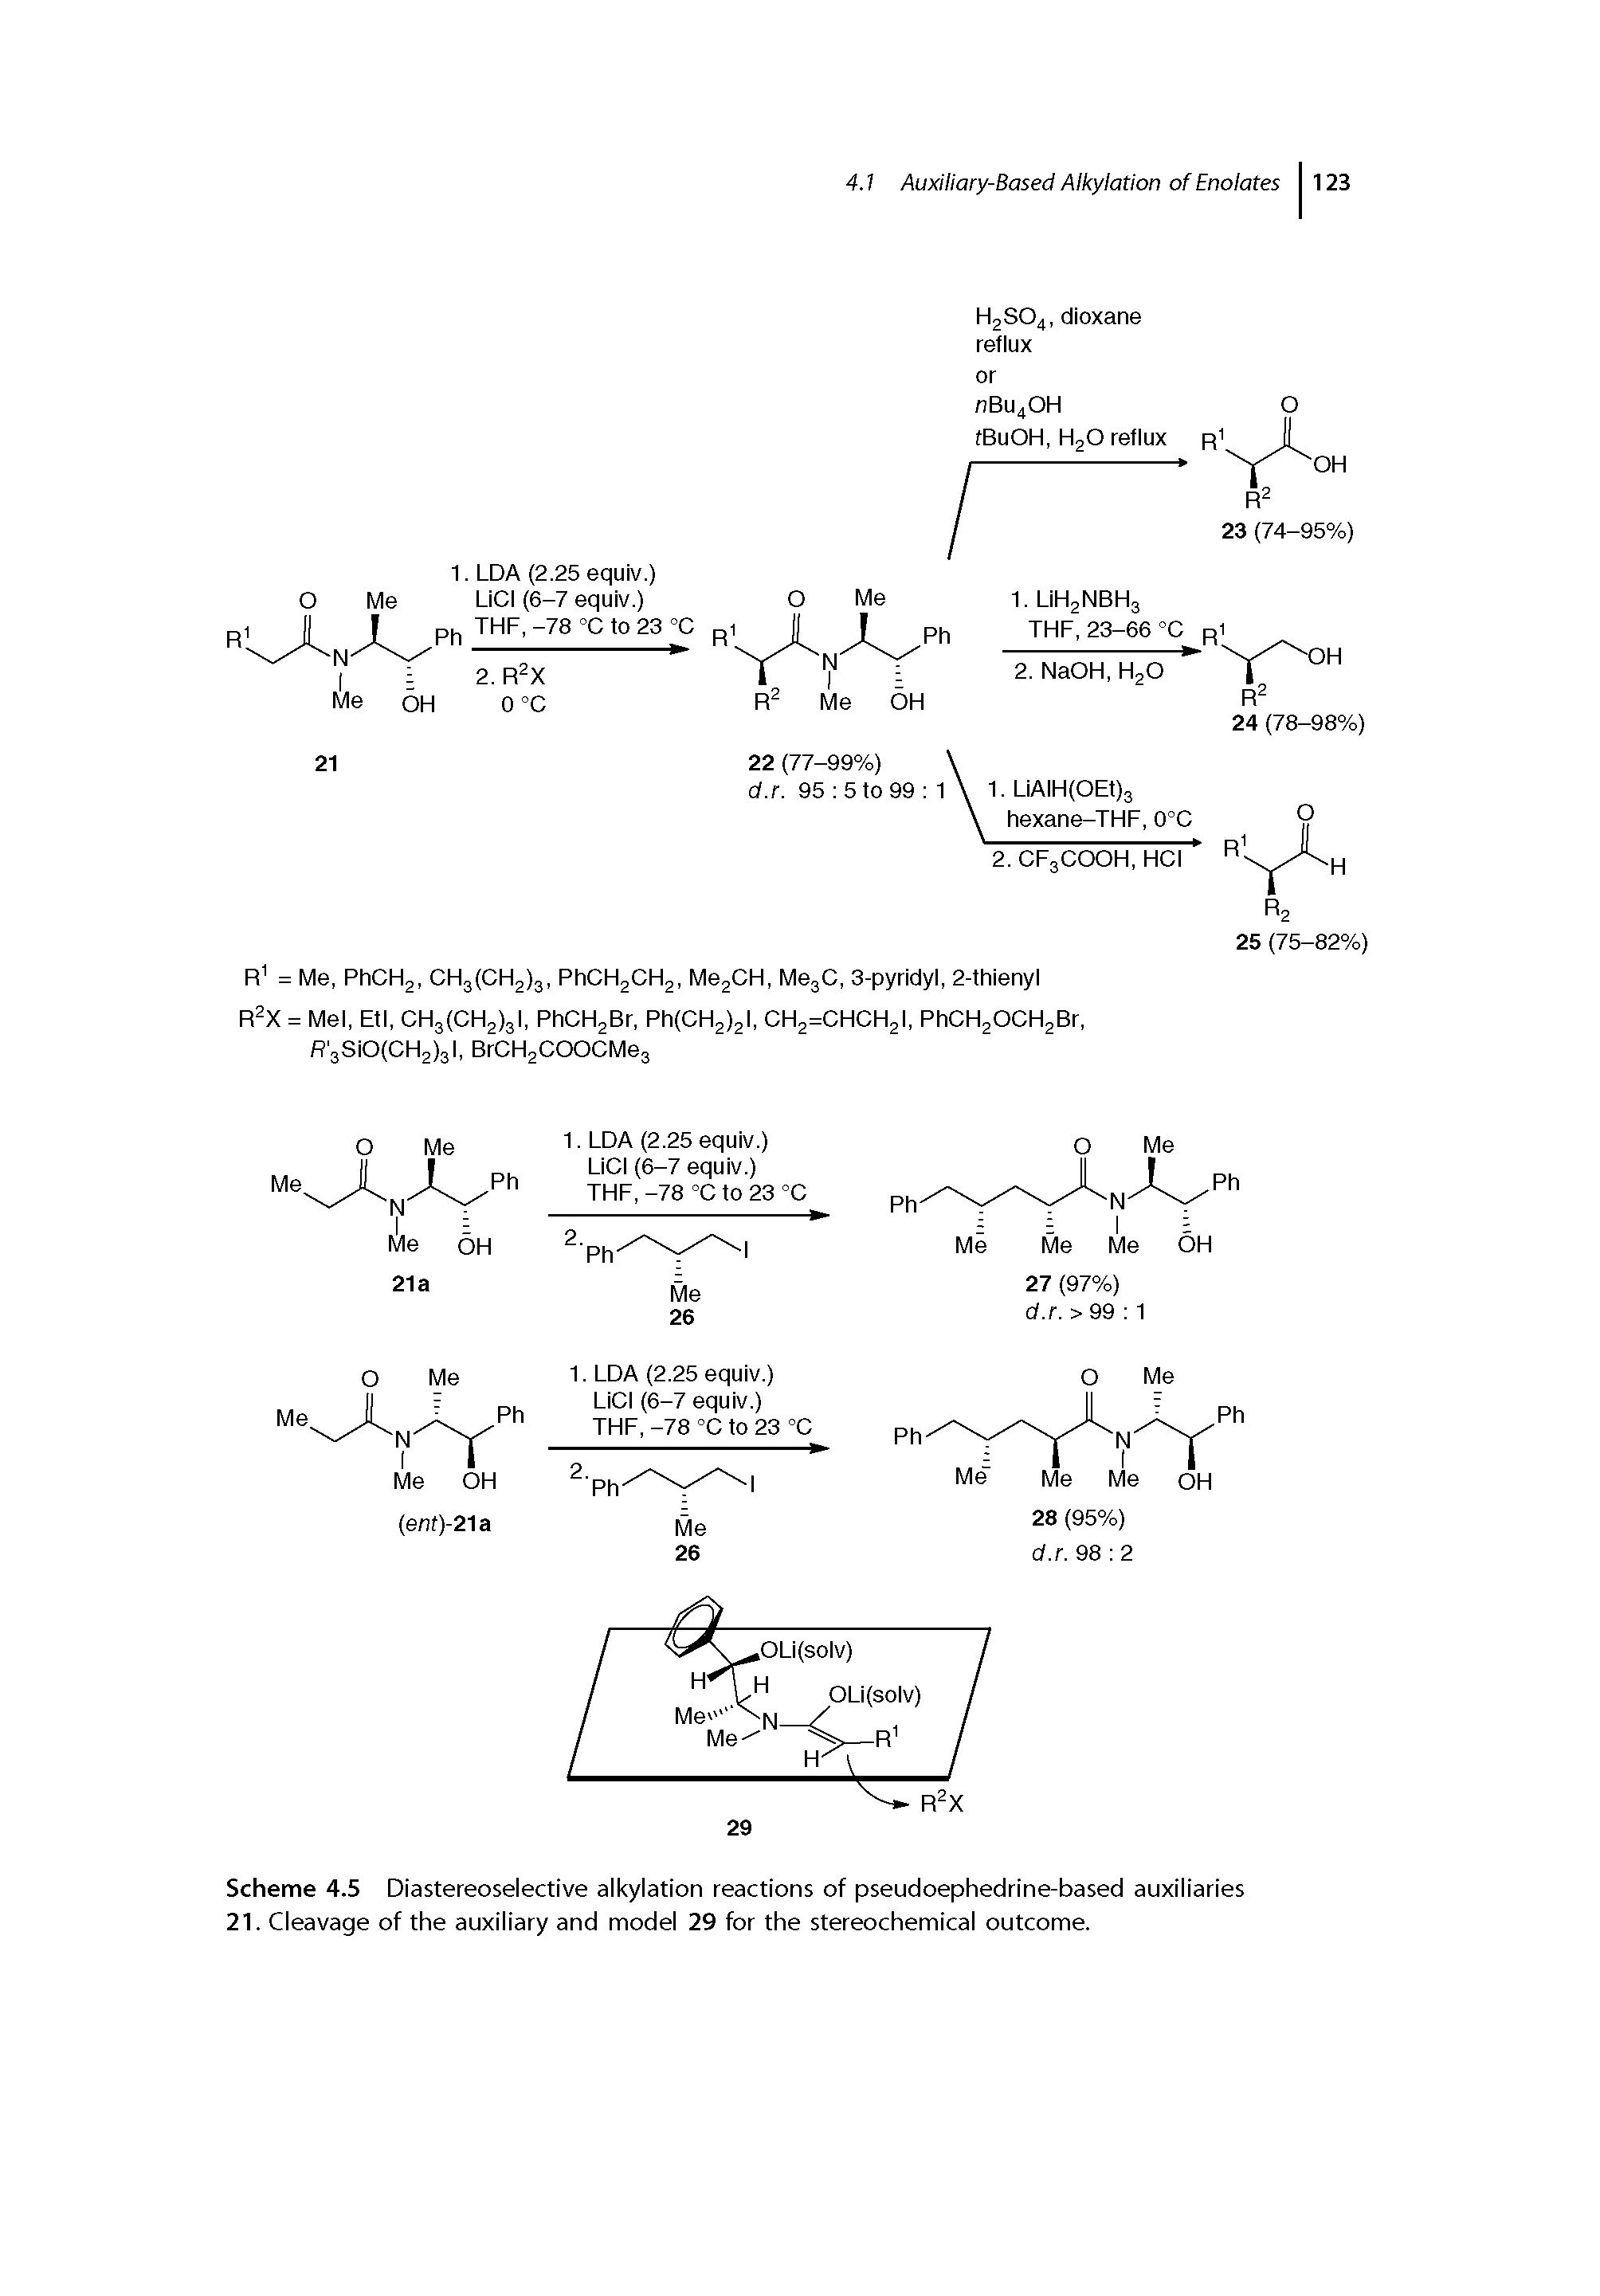 Scheme 4.5 Diastereoselective alkylation reactions of pseudoephedrine-based auxiliaries 21. Cleavage of the auxiliary and model 29 for the stereochemical outcome.